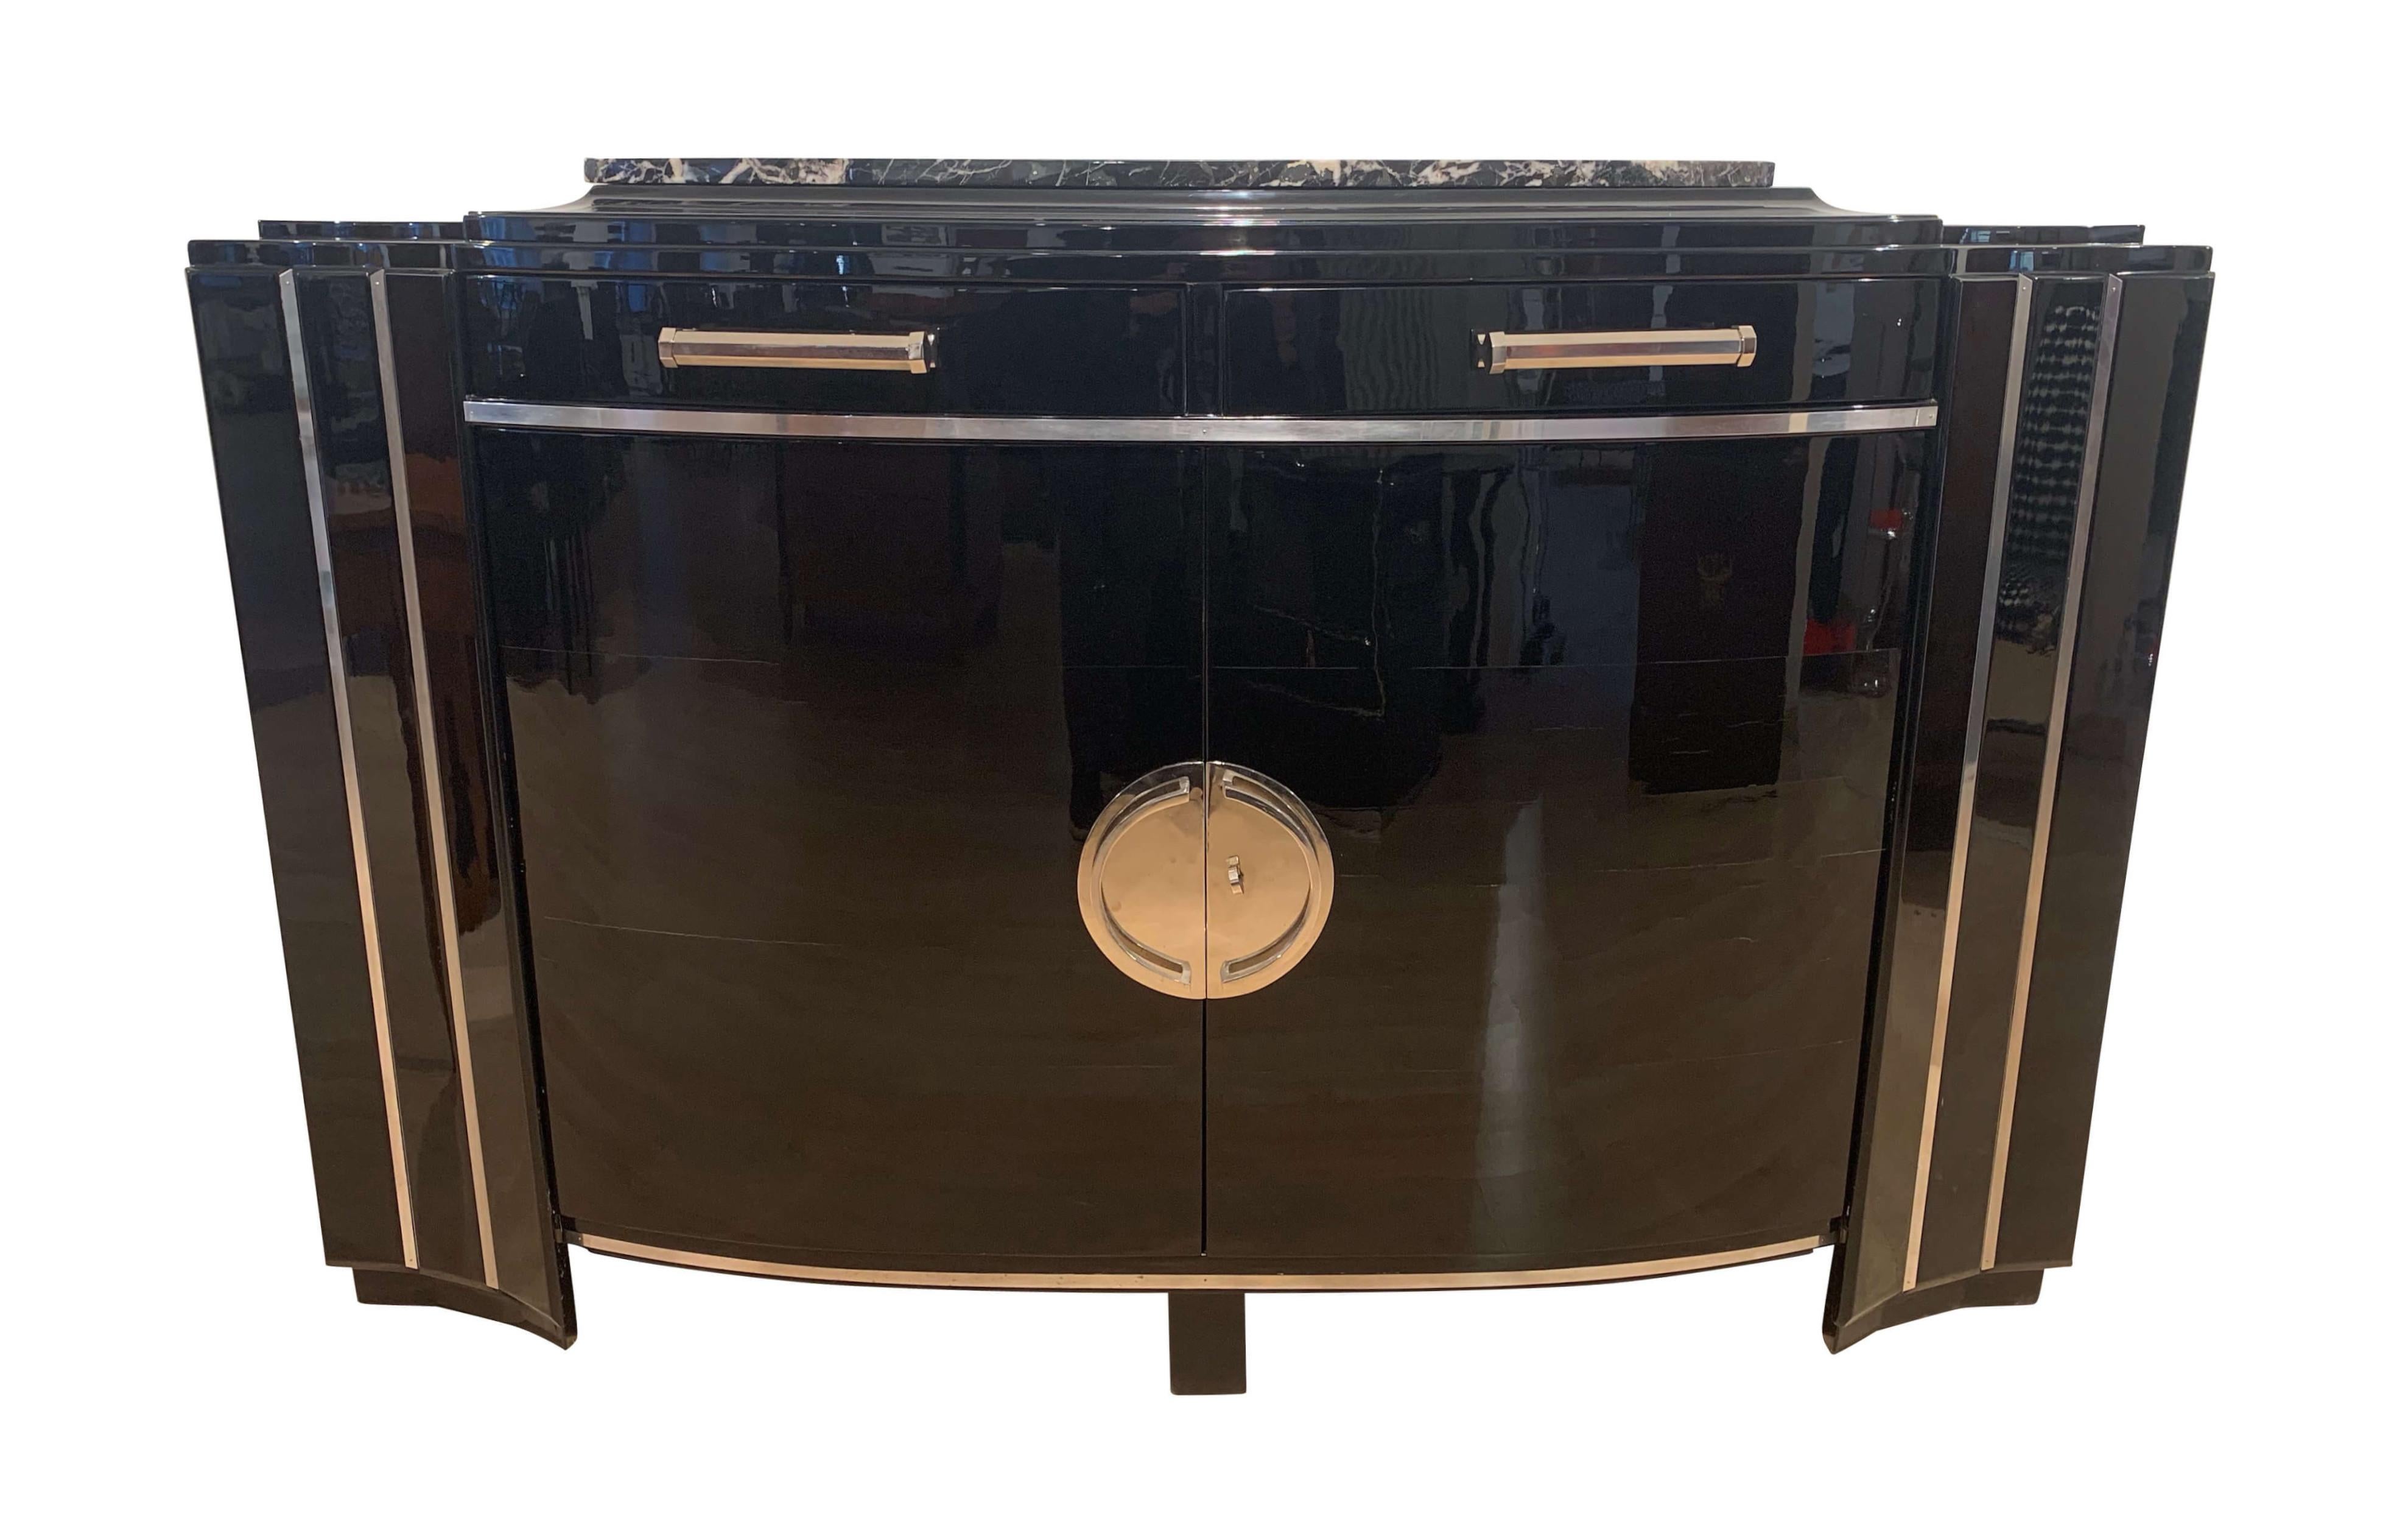 Elegant Art Deco sideboard with curved / convex doors, black lacquer, mahogany and chrome, from France, circa 1930.

The walnut solid wood underneath has been lacquered with black, polished polyurethane lacquer.
Originally is had a dark stained